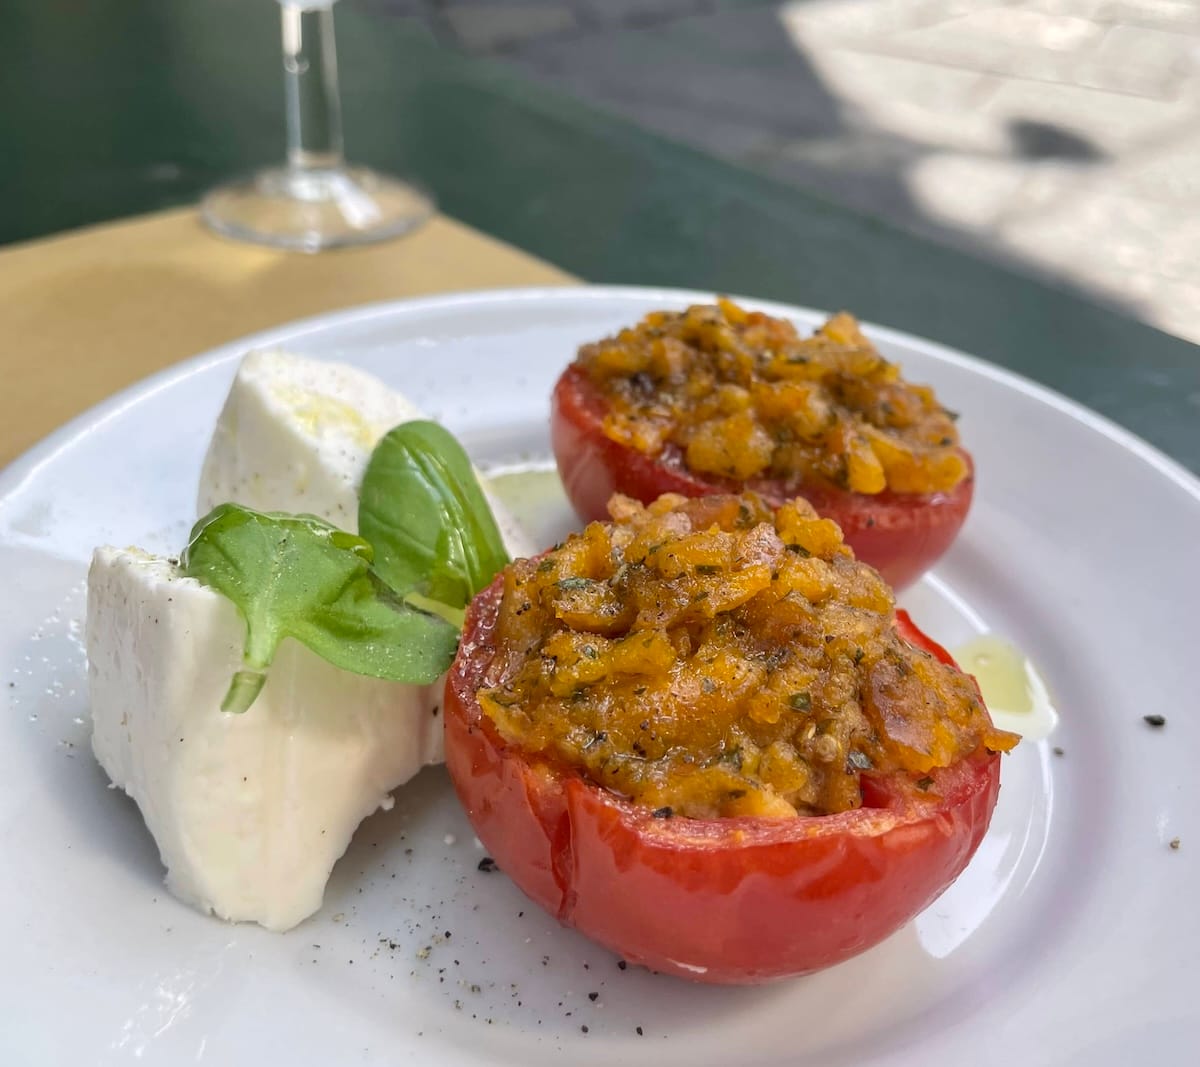 What It's Like To Be Vegetarian In Italy